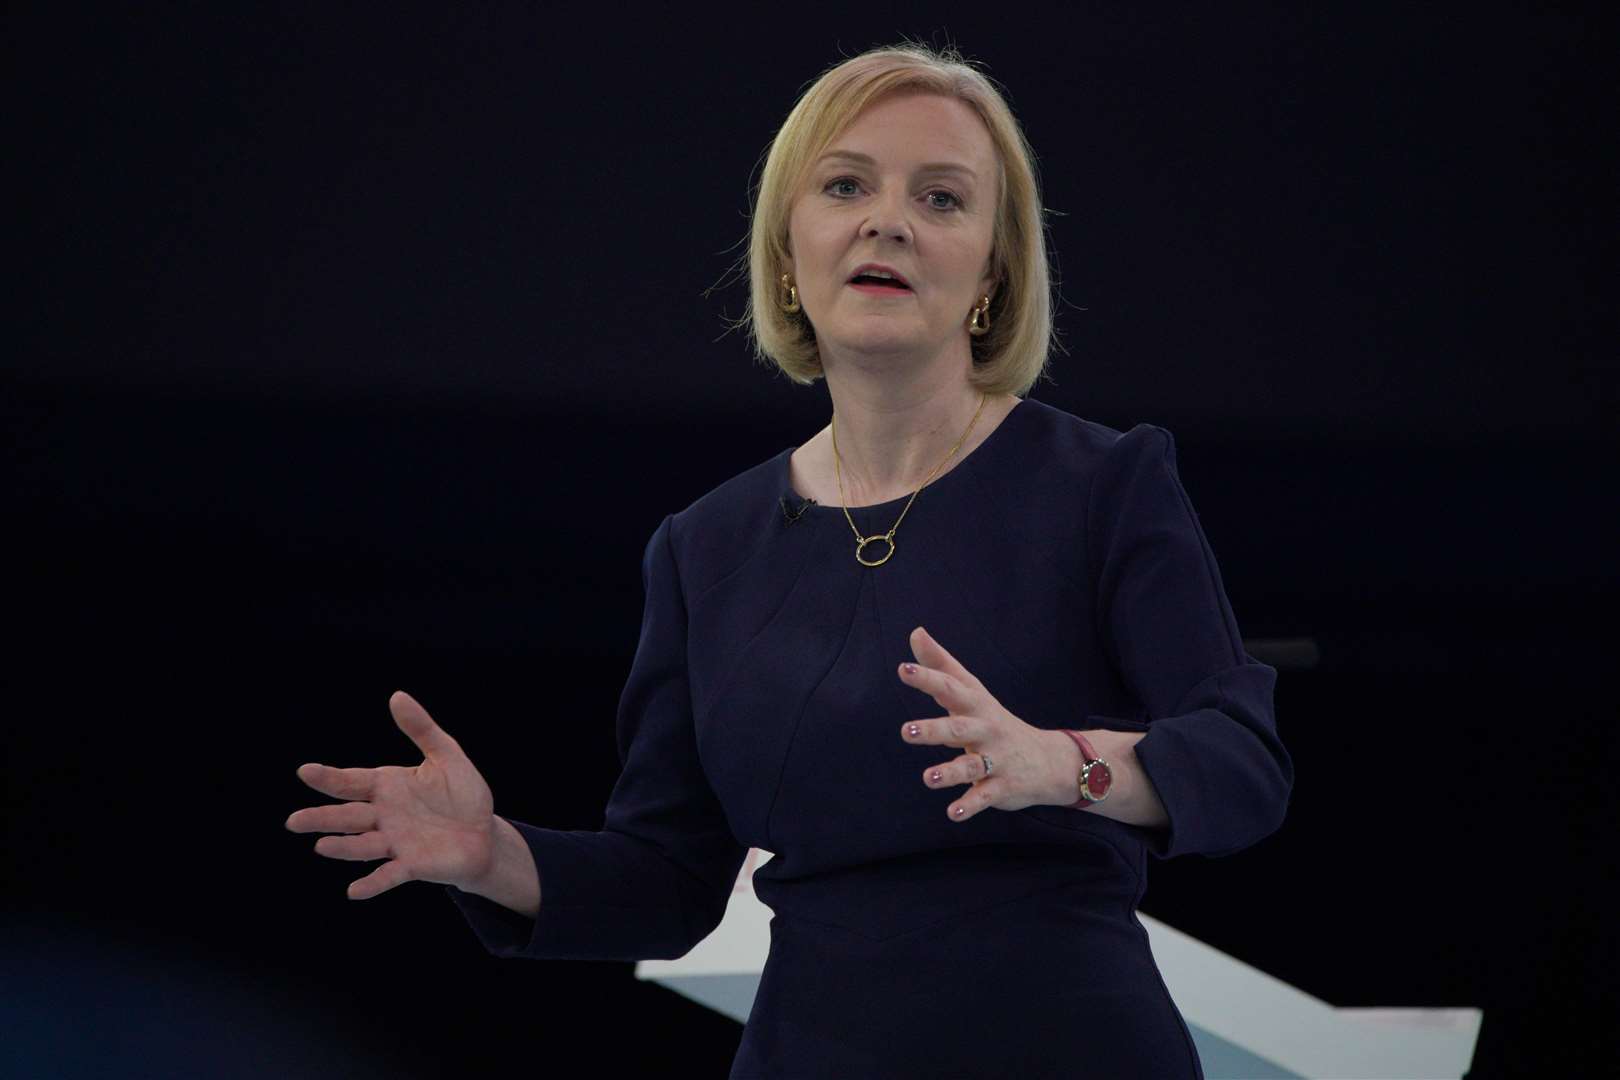 Liz Truss during a hustings event at Manchester Central Convention Complex (Peter Byrne/PA)